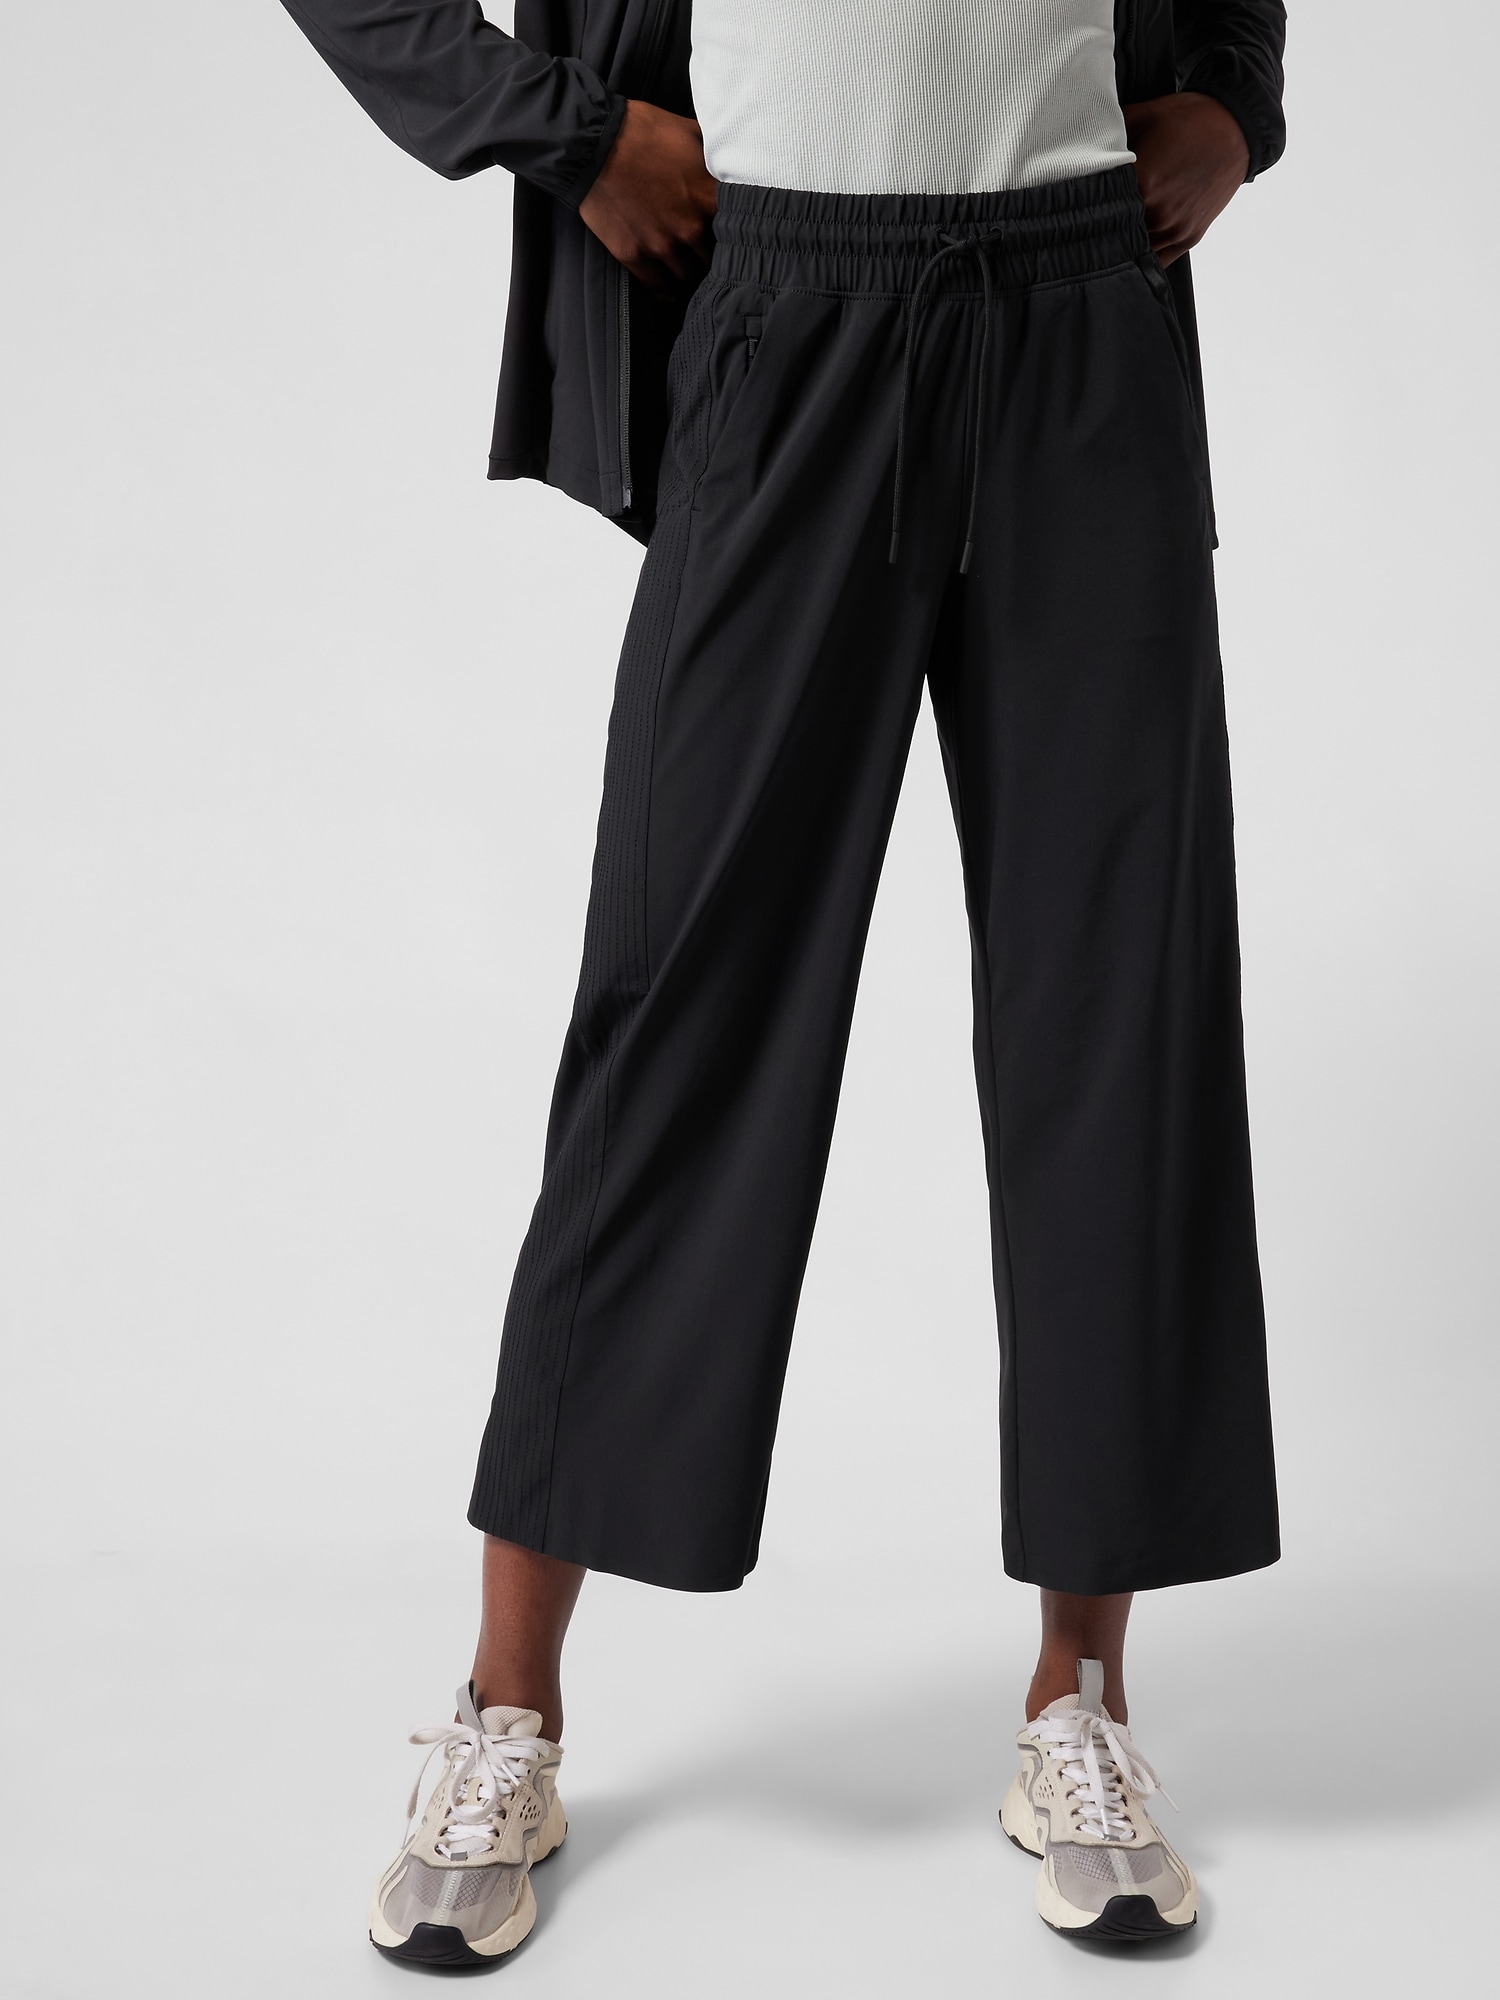 Everyday Knit Wide-Leg Crop Pant